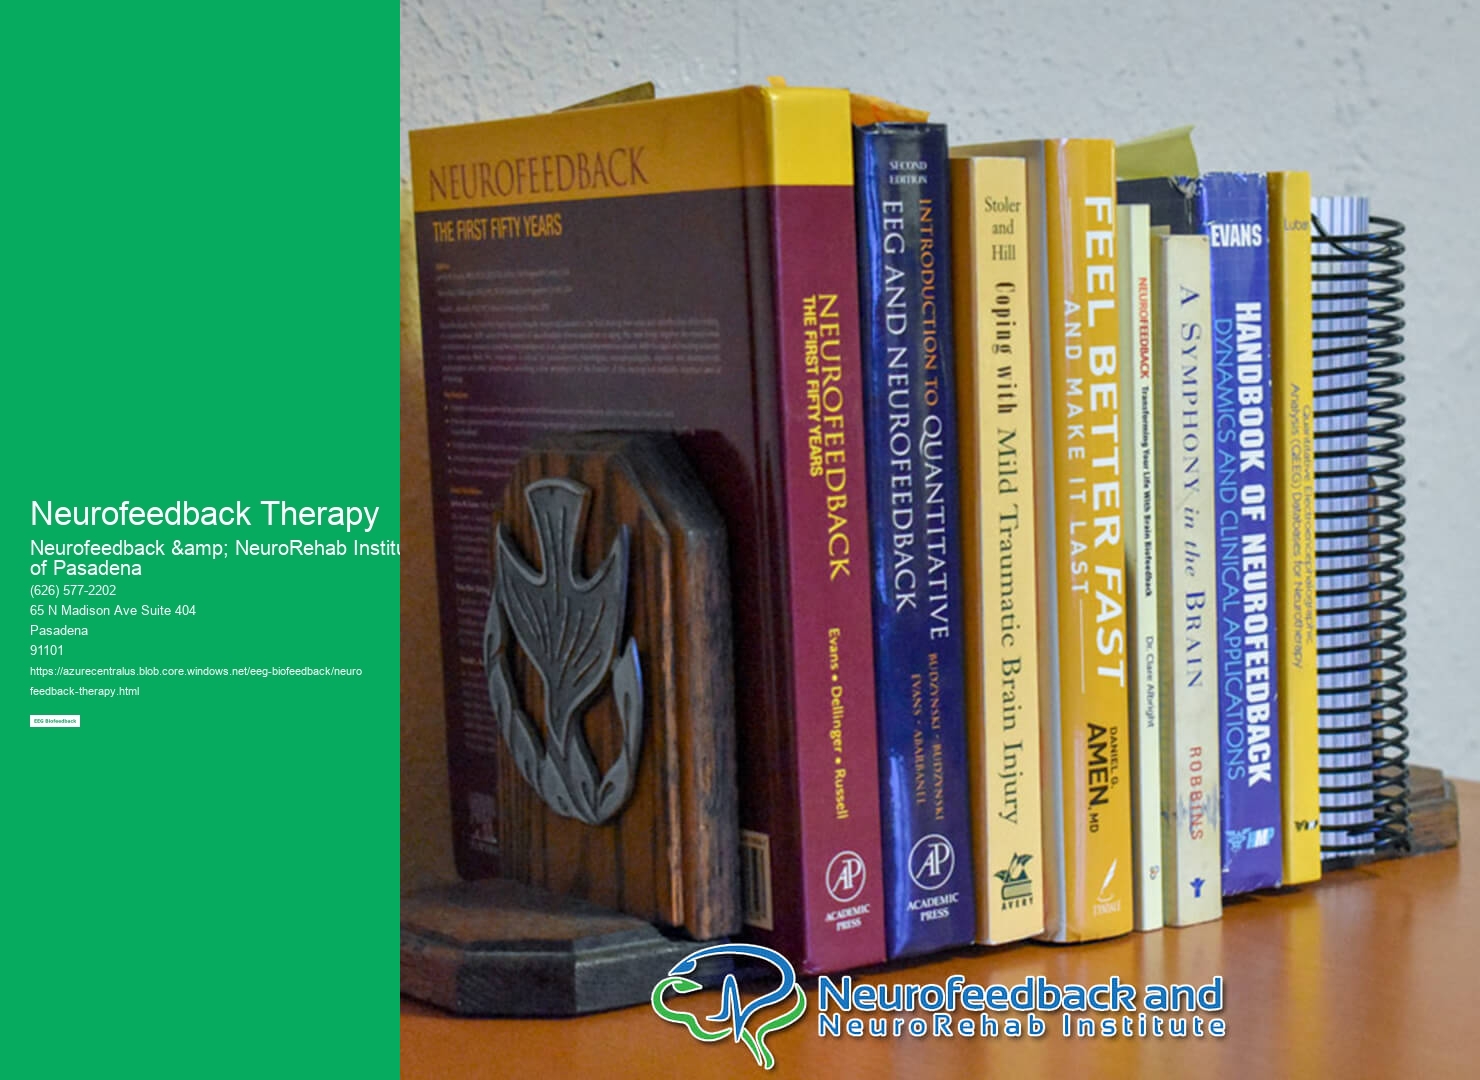 How does neurofeedback therapy help individuals with post-traumatic stress disorder (PTSD)?